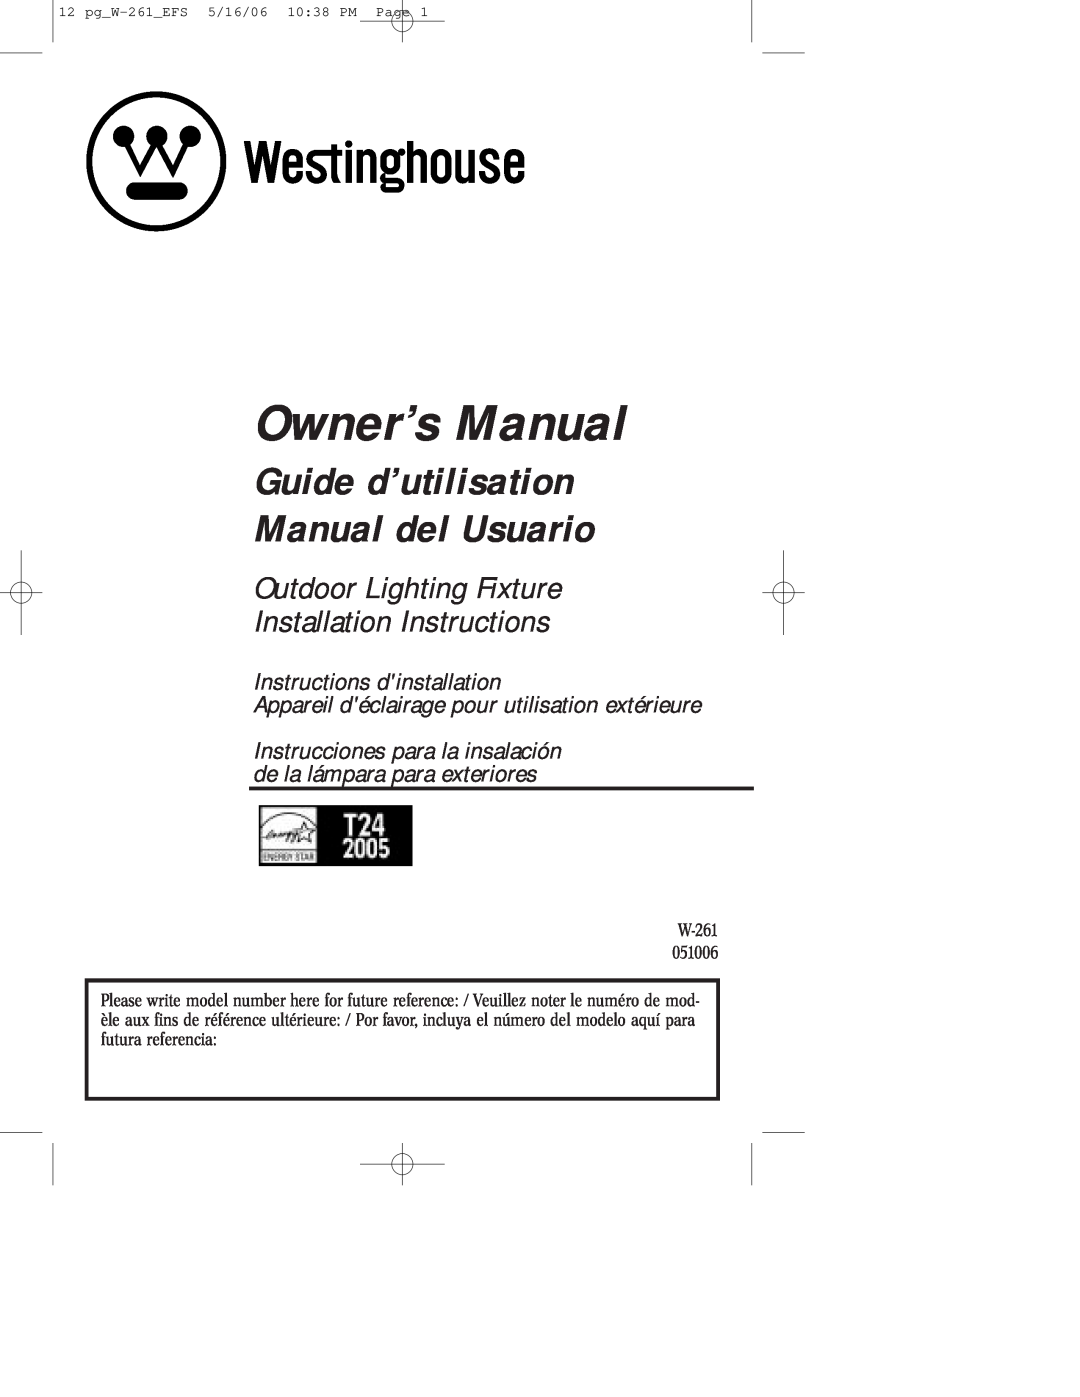 Westinghouse W-261 owner manual Guide d’utilisation Manual del Usuario, Outdoor Lighting Fixture Installation Instructions 